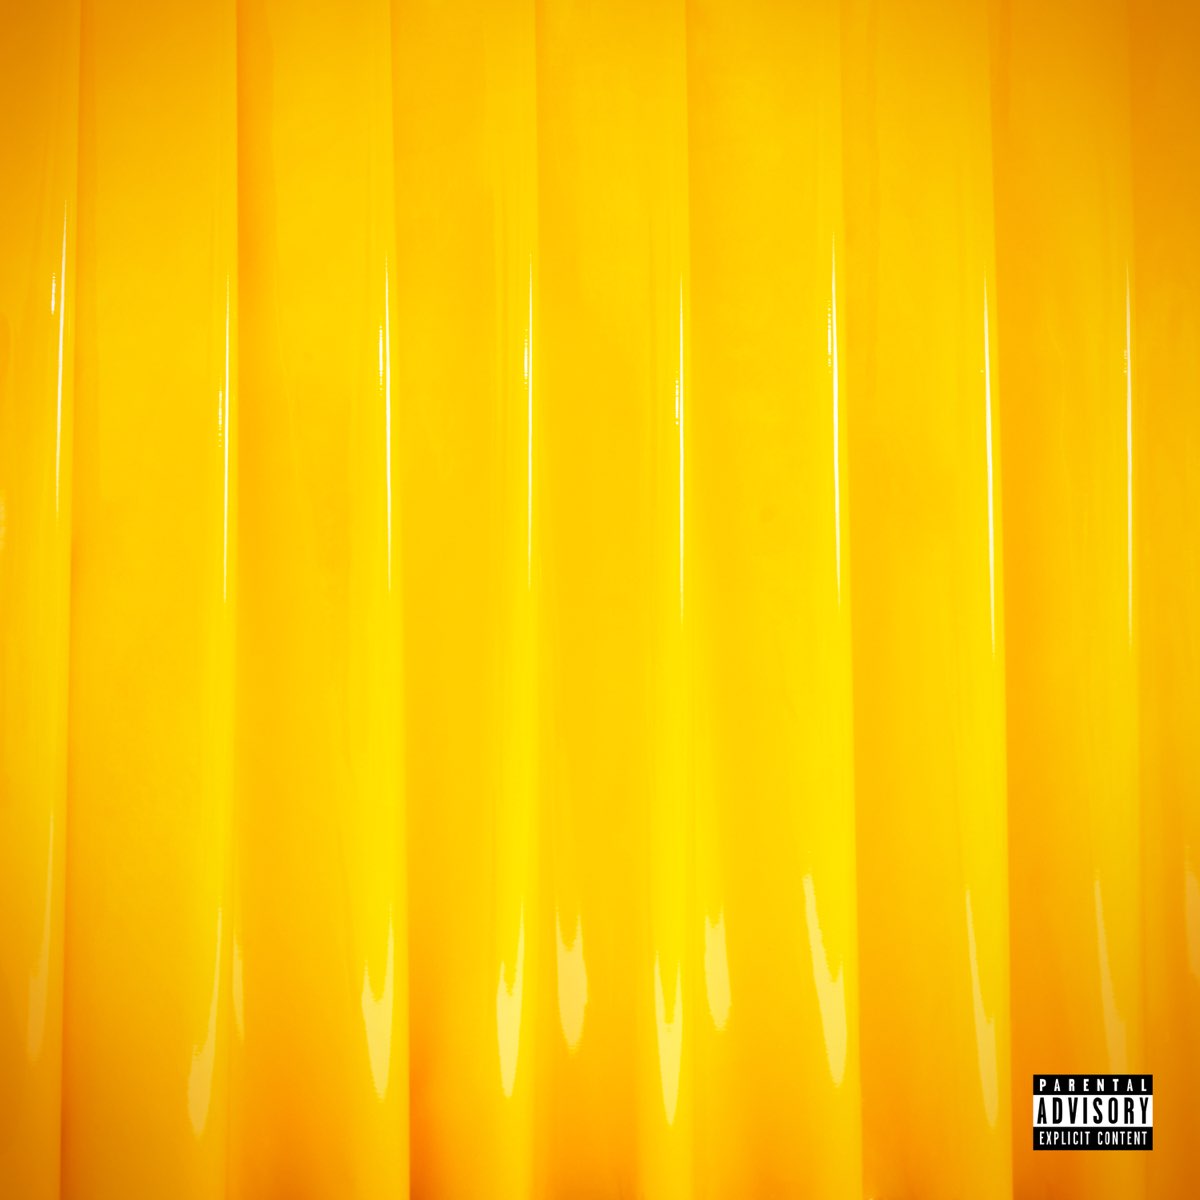 All Is Yellow is the first studio album by Cole Bennett, best known for his work on Lyrical Lemonade. It was released on Jan. 26.